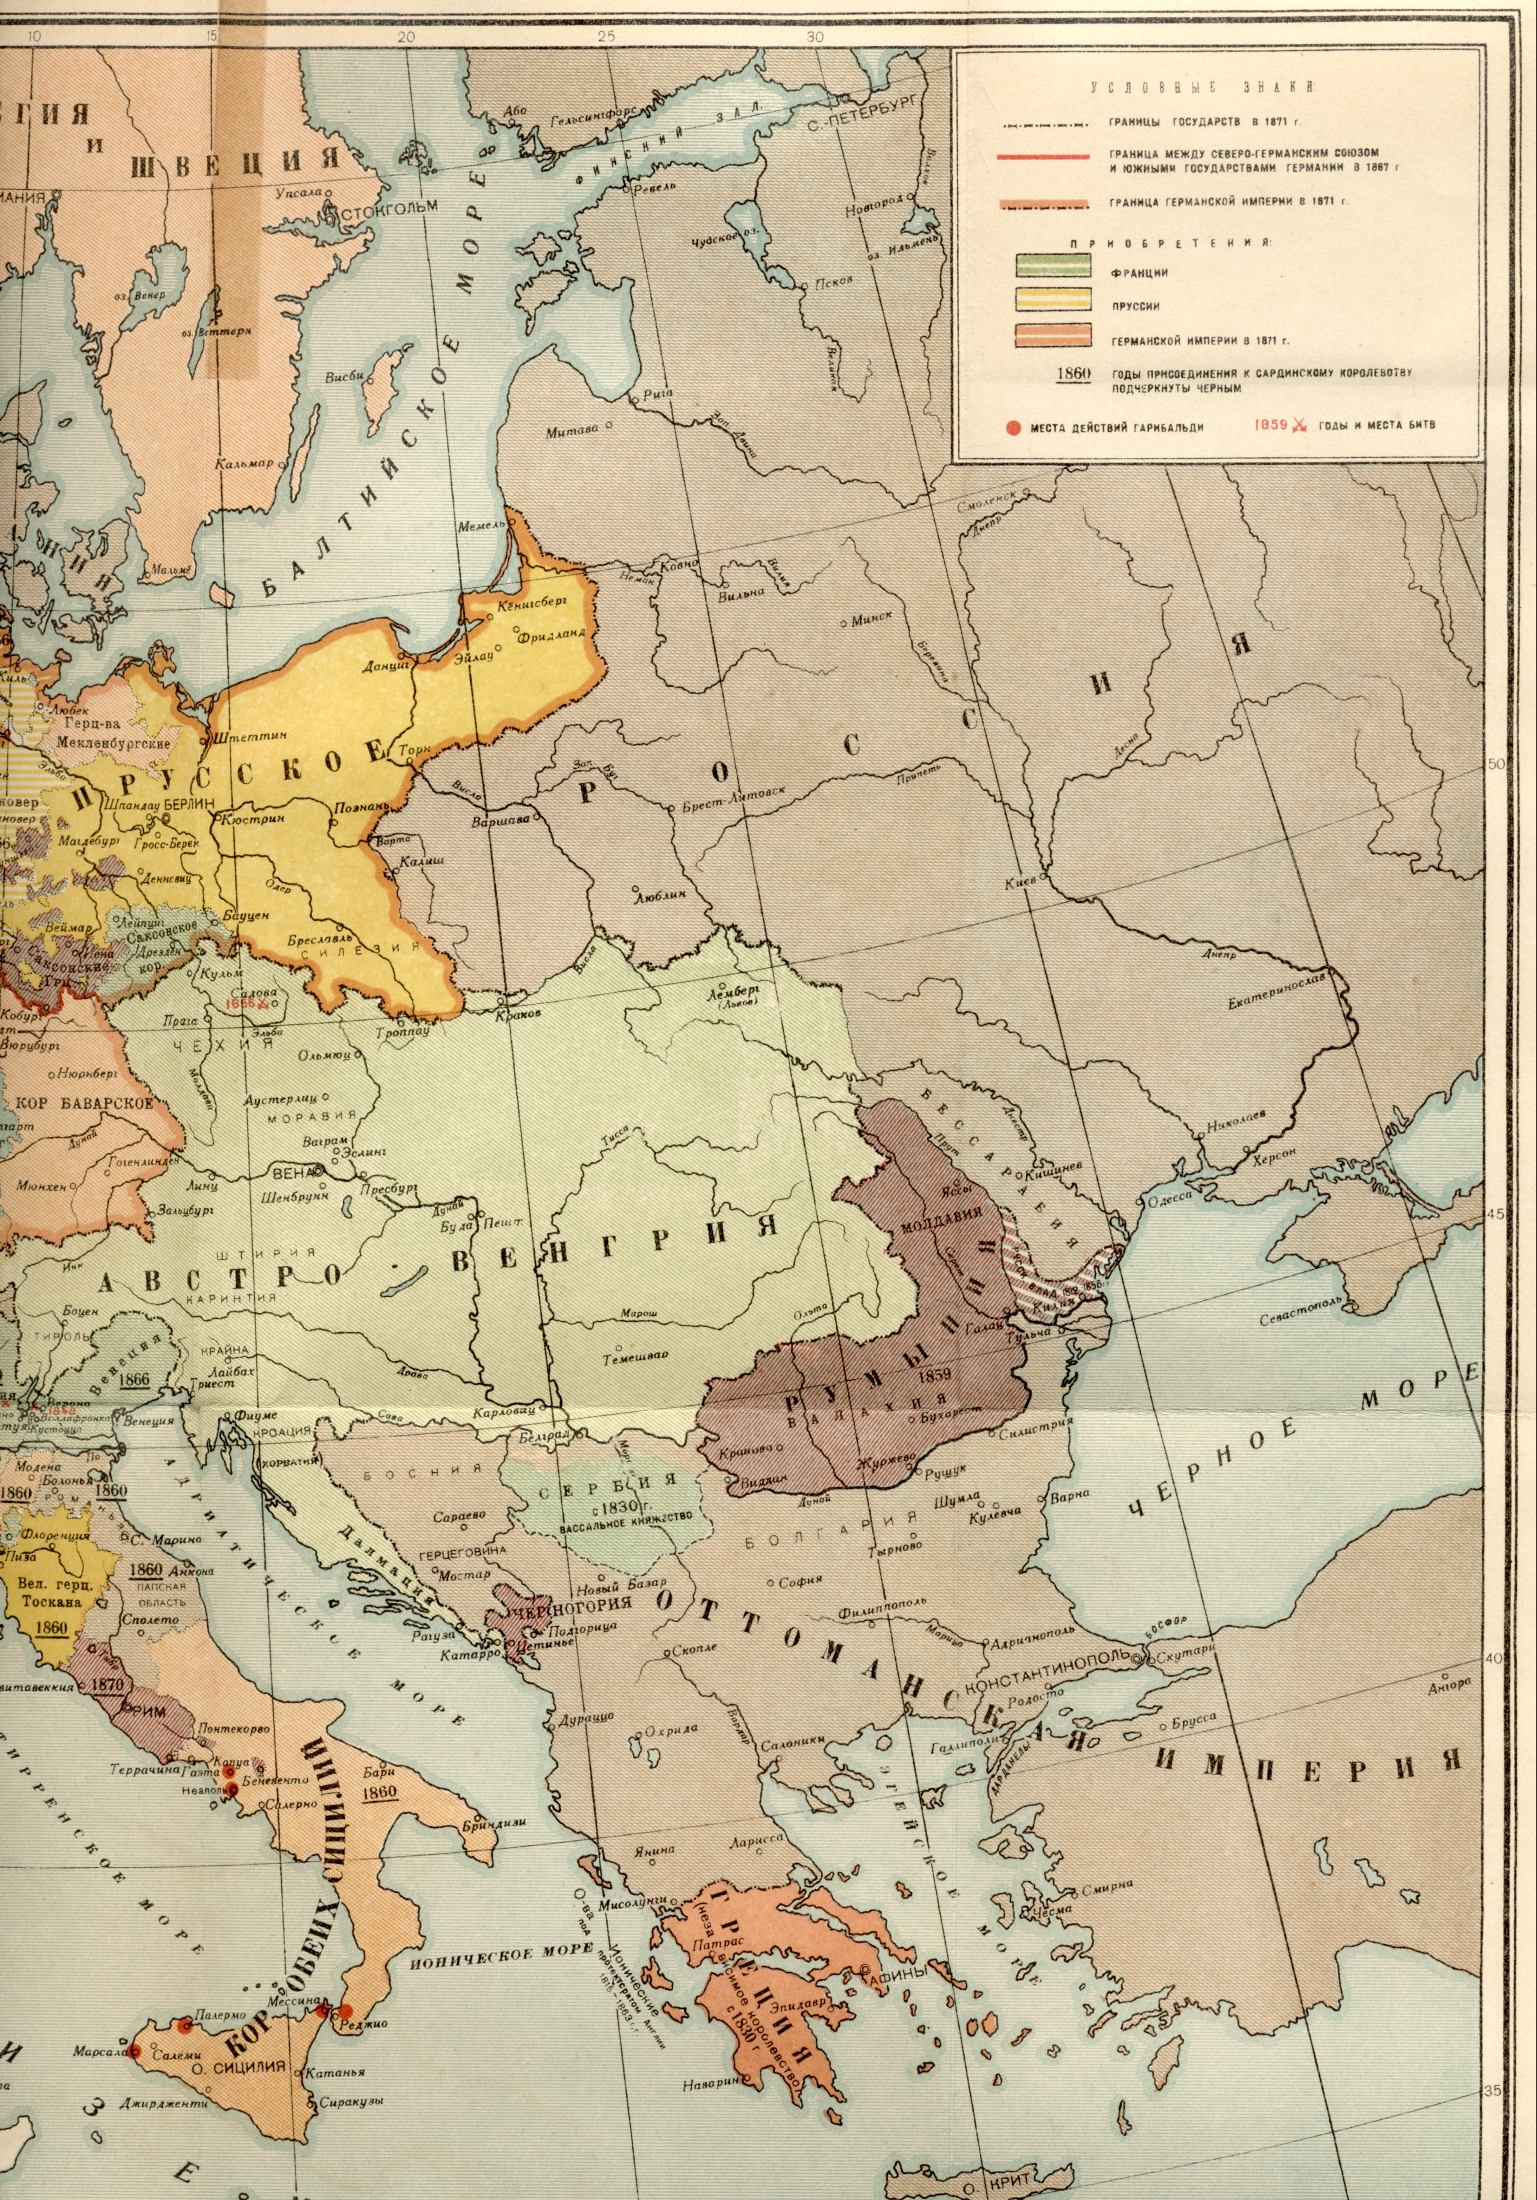 1871 god.Politicheskaya world map - the map of Europe in 1871 - the completion of the unification of Italy and the reunification of Germany, B0